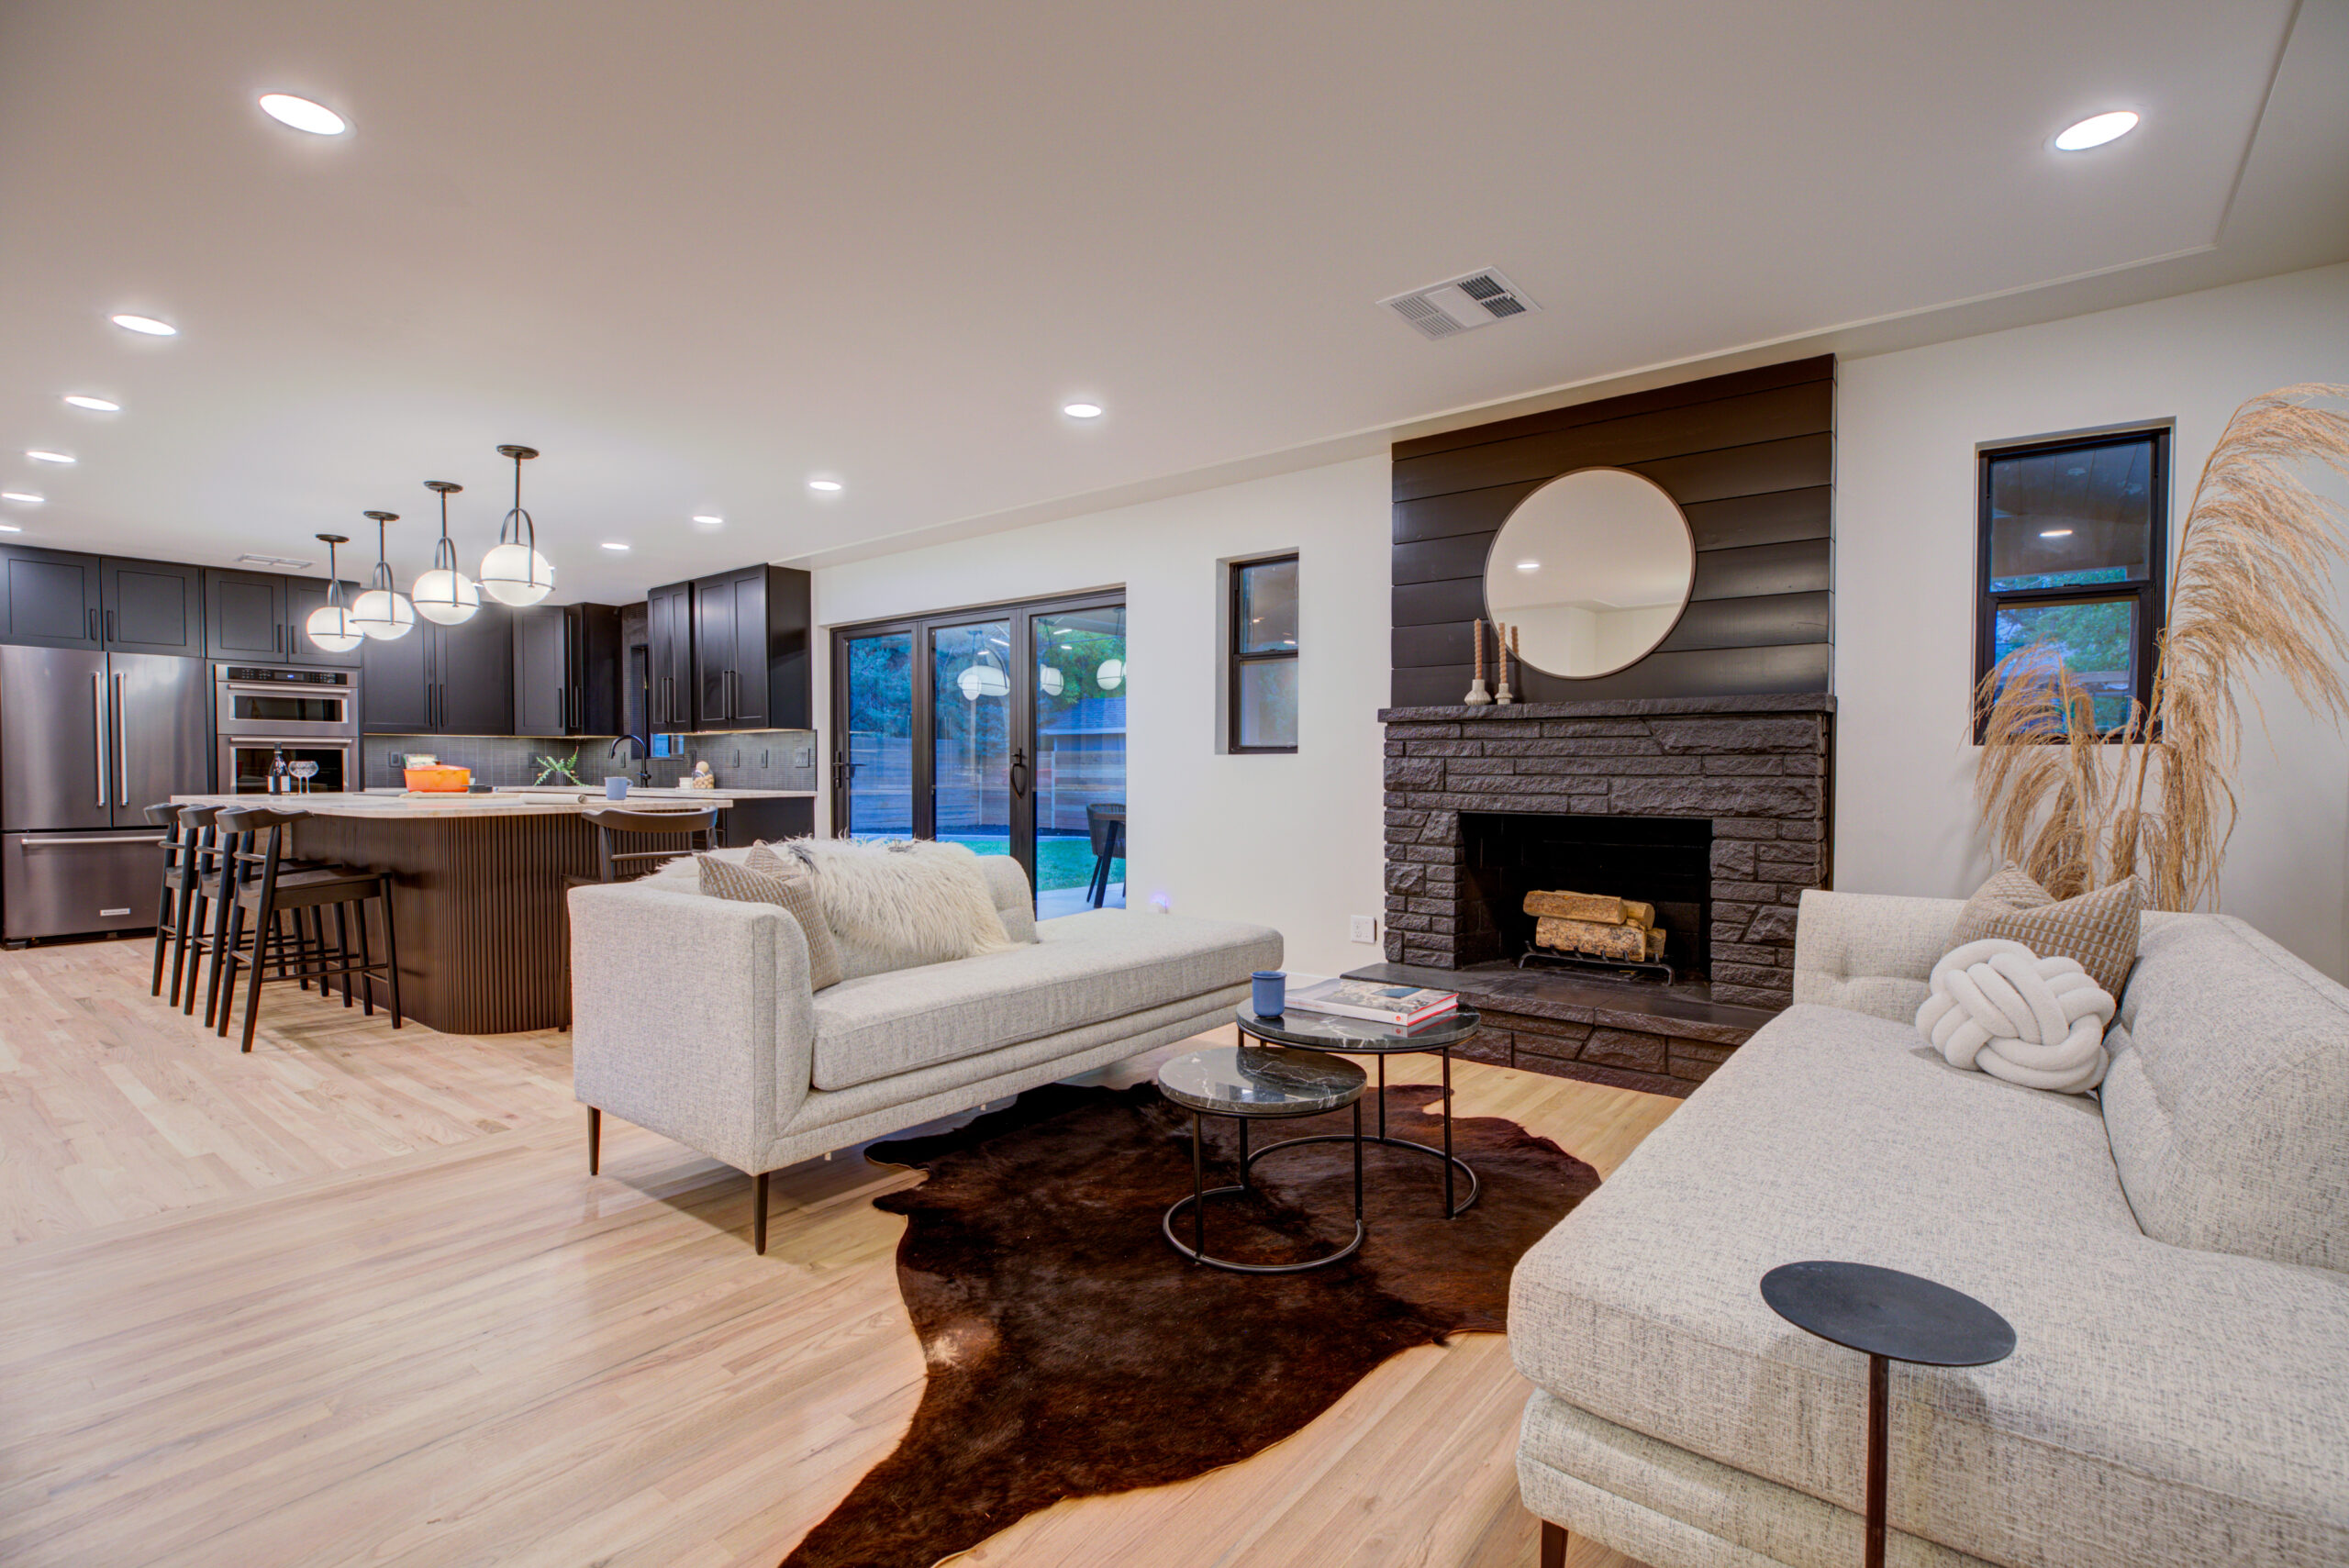 A modern, open-concept living room in a Denver home with a cozy seating area, fireplace, and integrated kitchen, featuring clean lines and a warm color palette. It includes natural light streaming in through